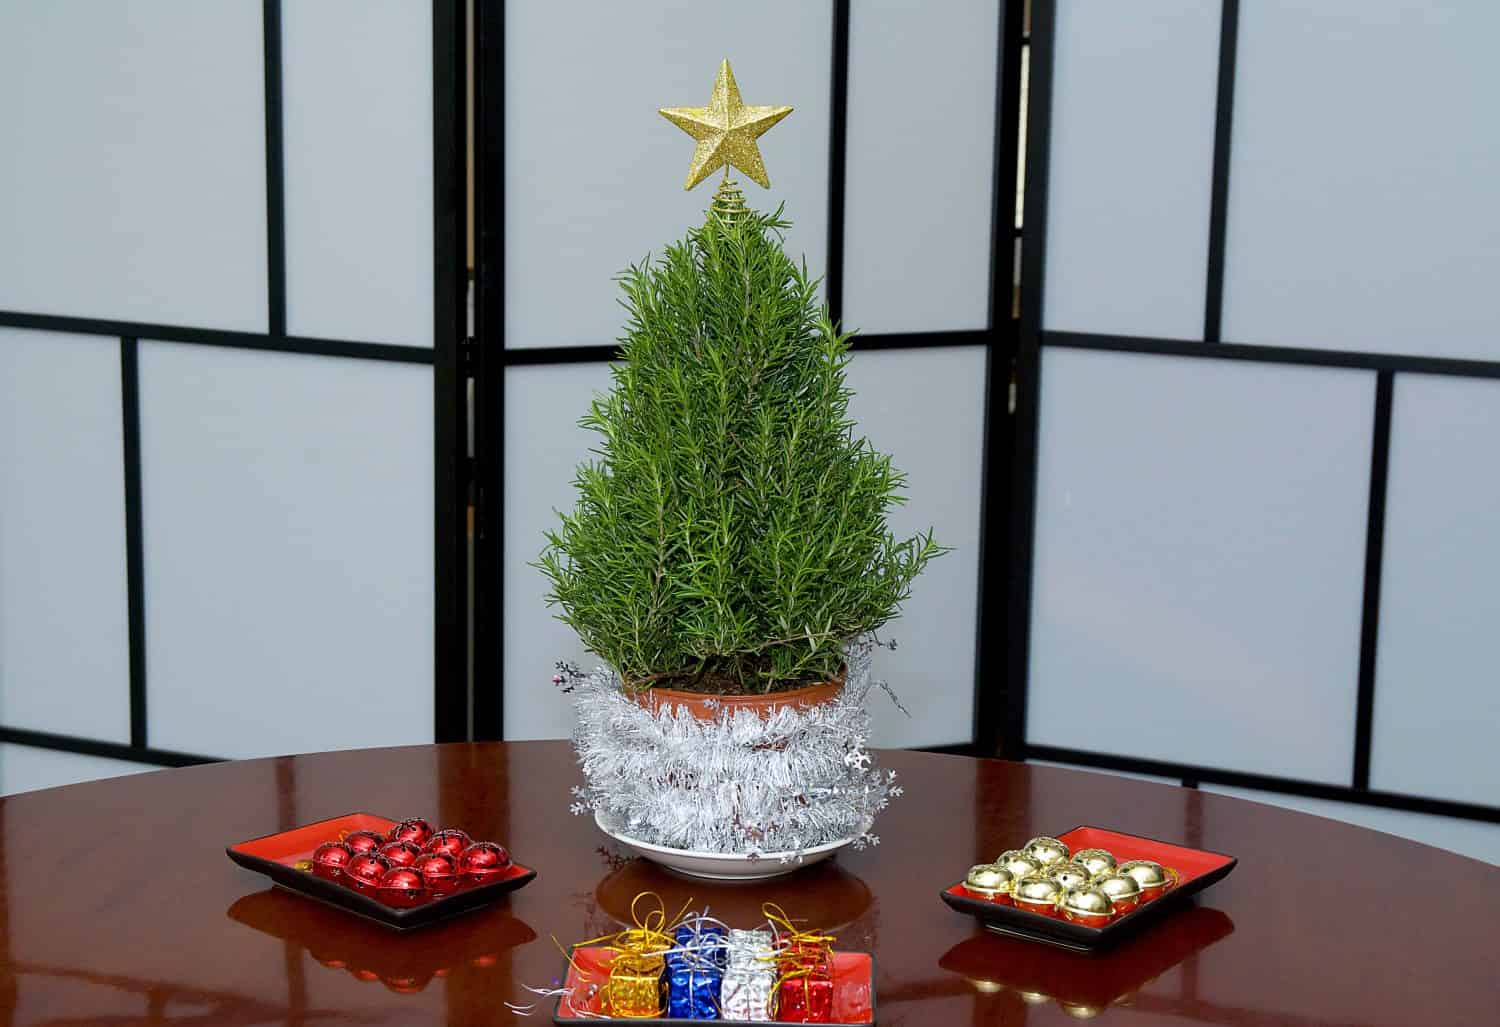 Mini Rosemary Christmas Tree in Studio with a Gold Star Shot in HDR